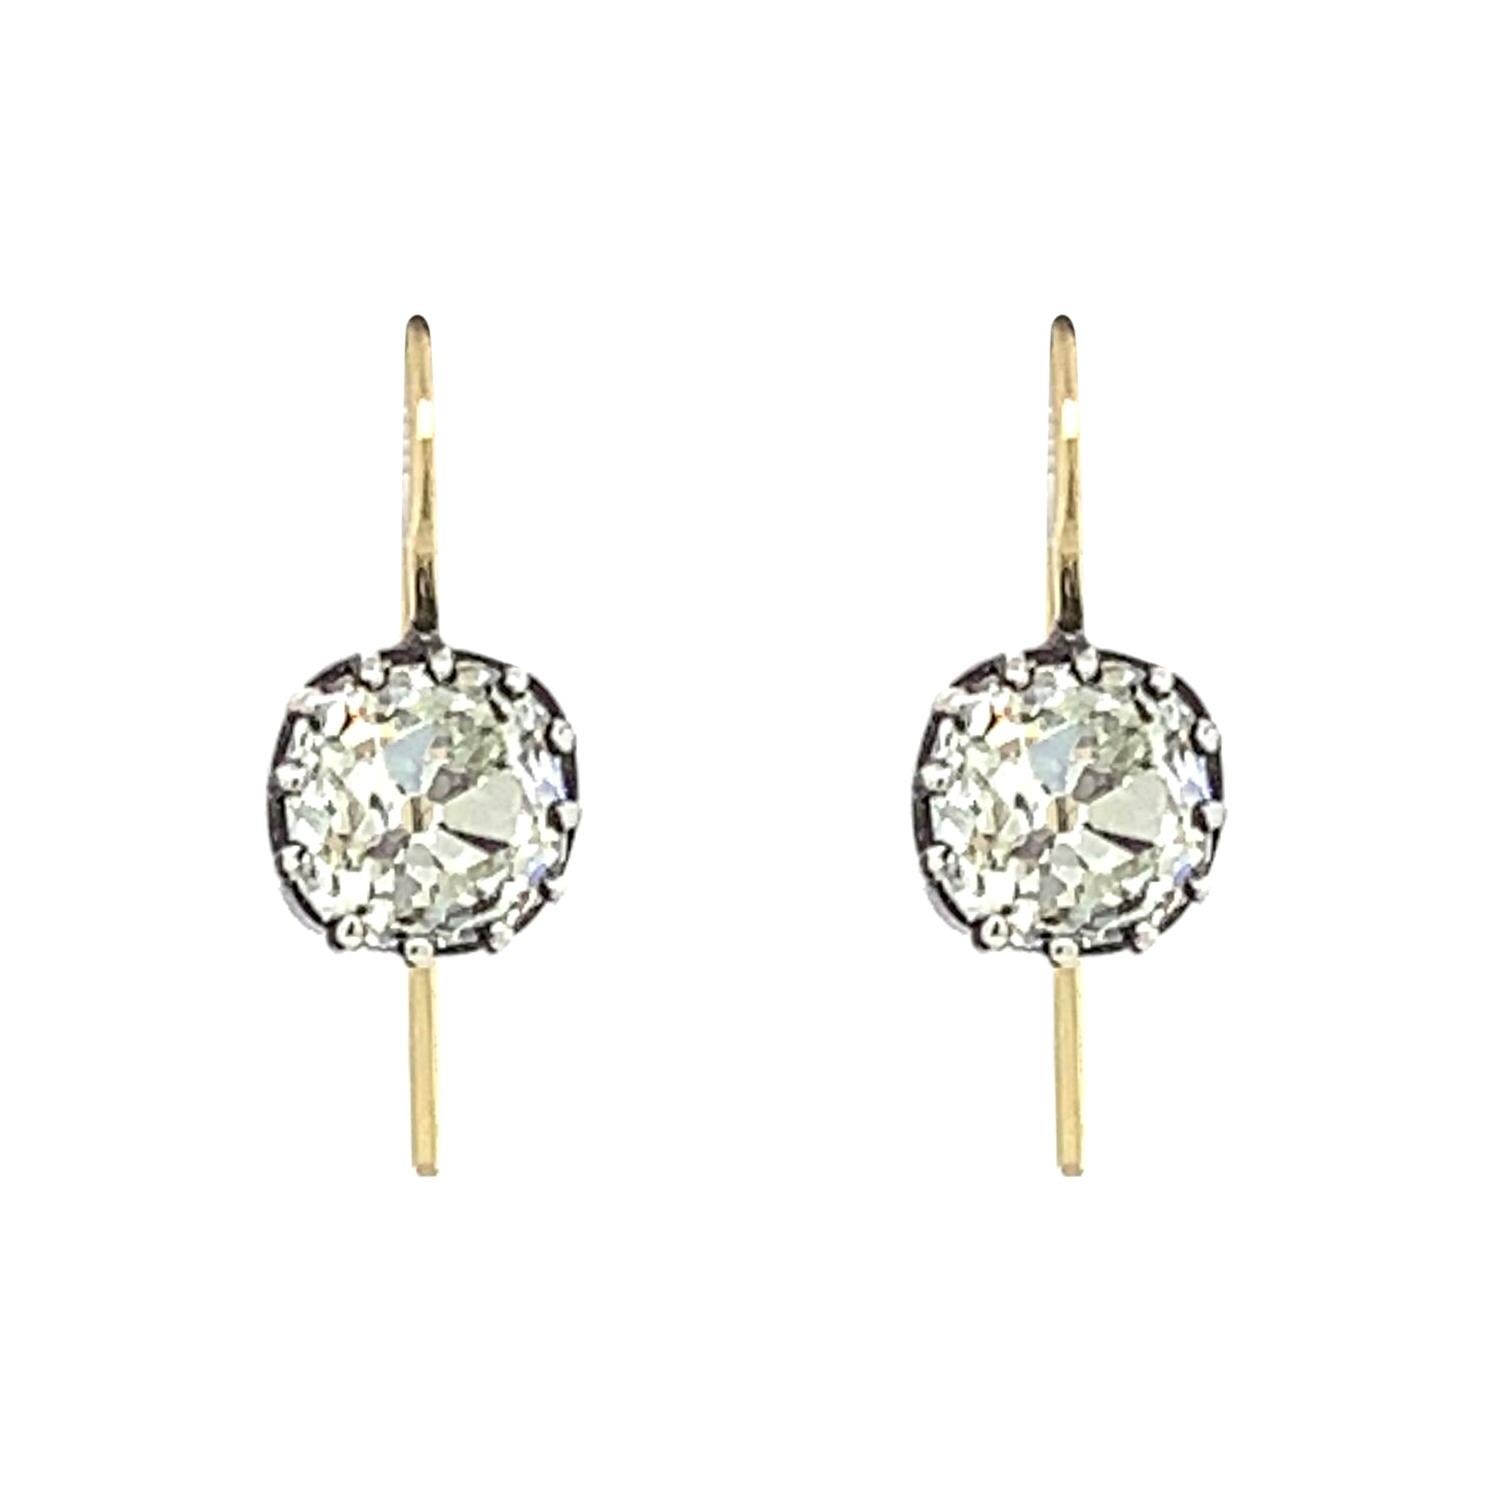 Antique Silver and Gold Diamond Earrings For Sale